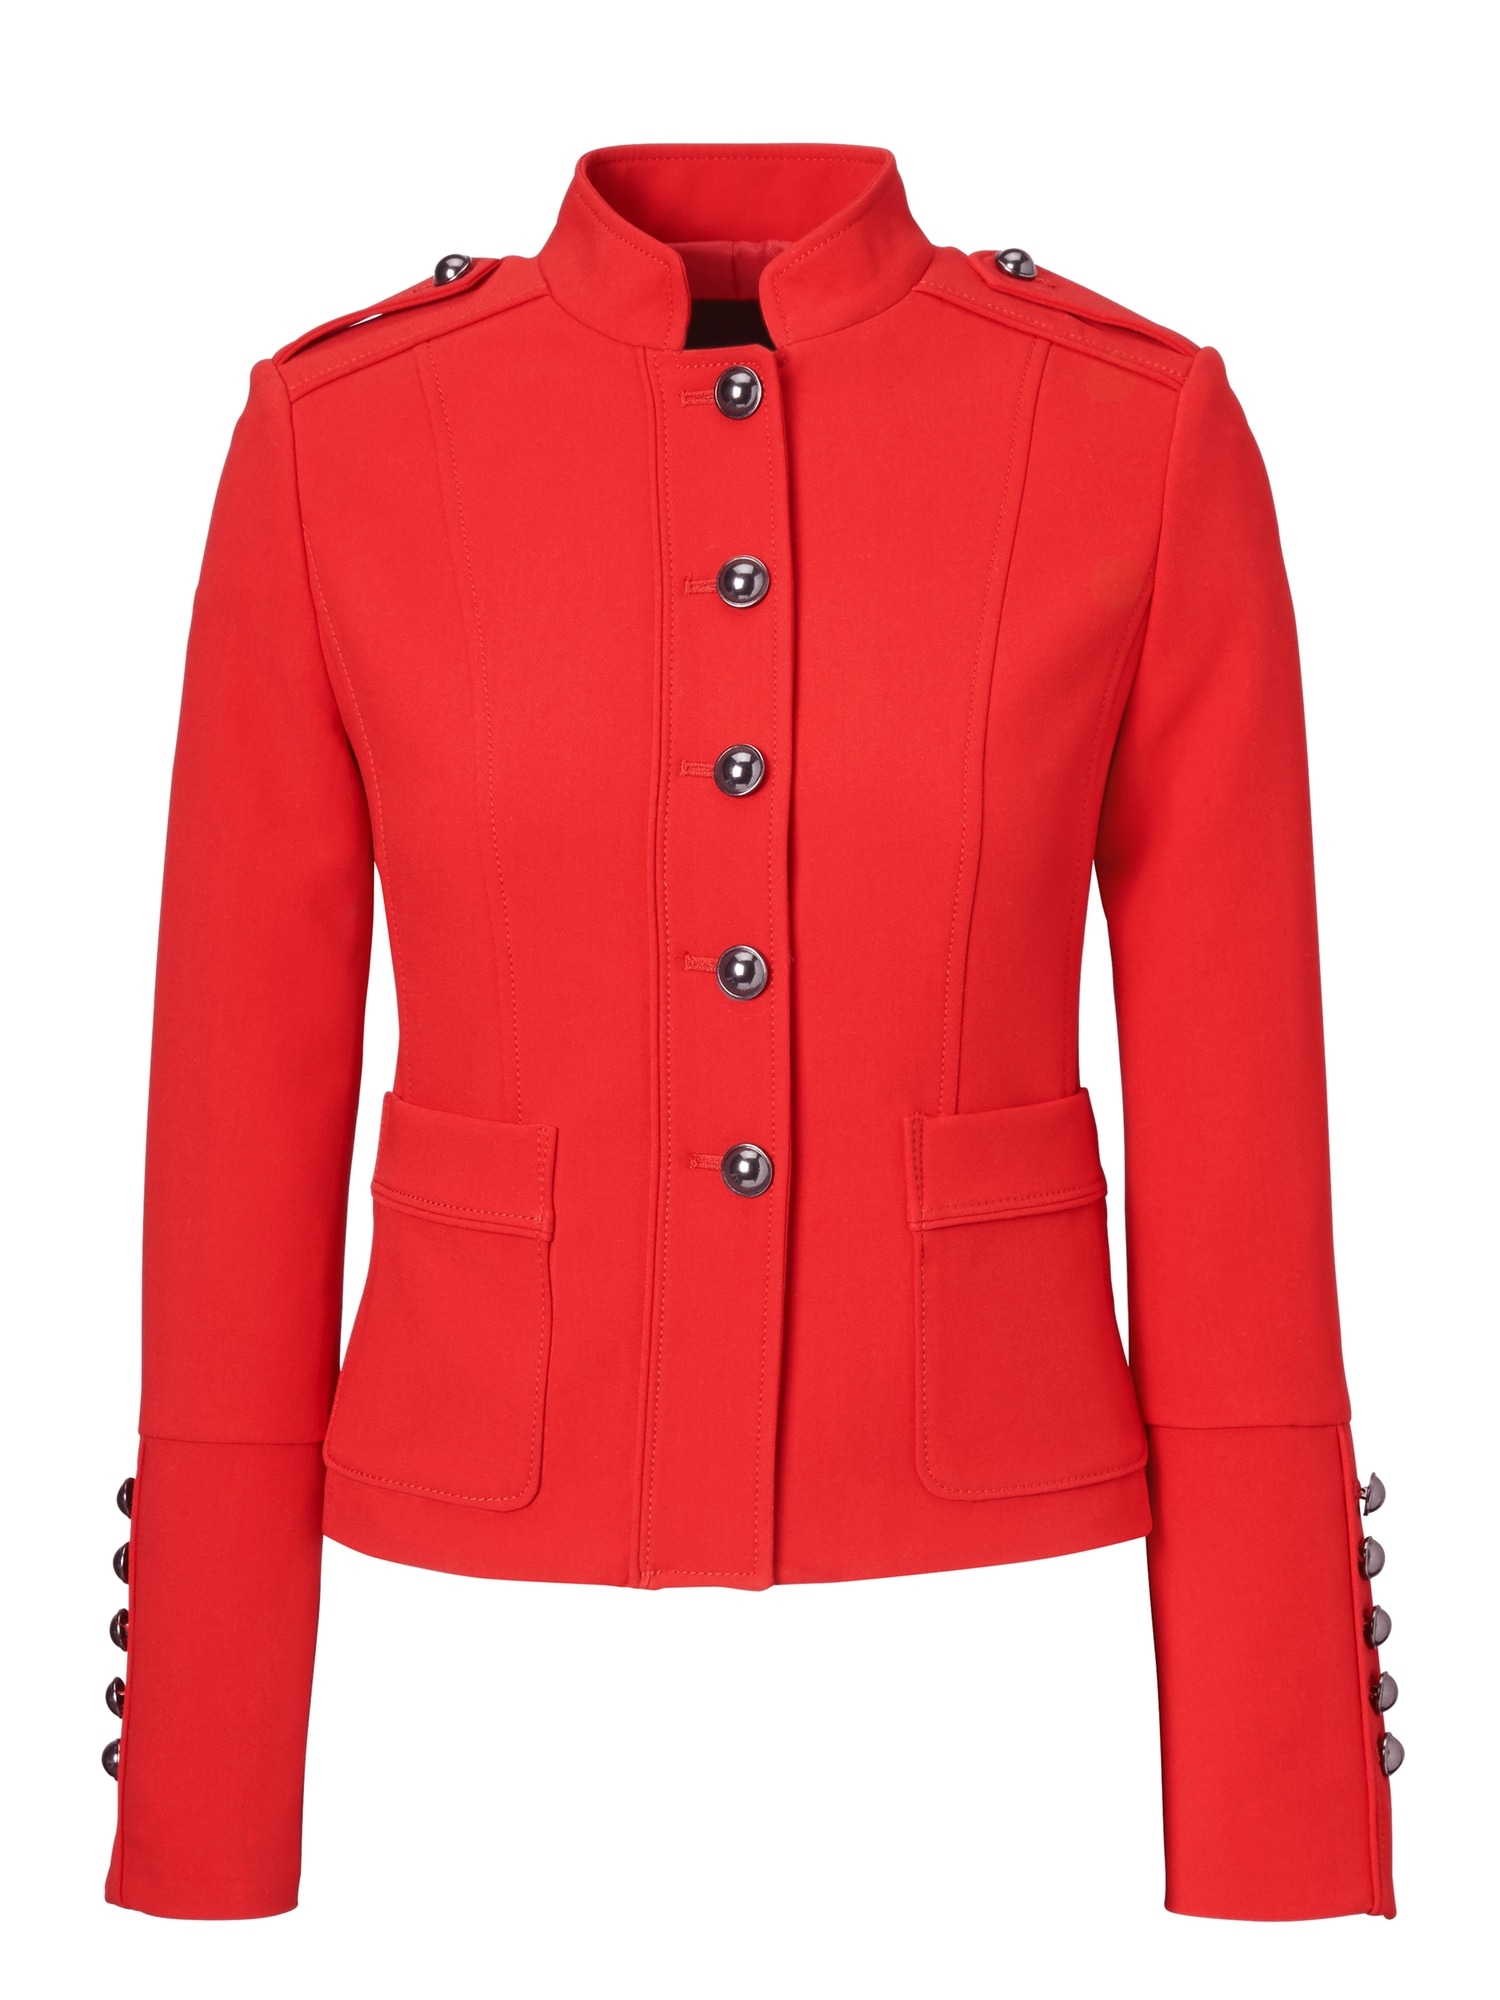 Stand-Collar Jacket